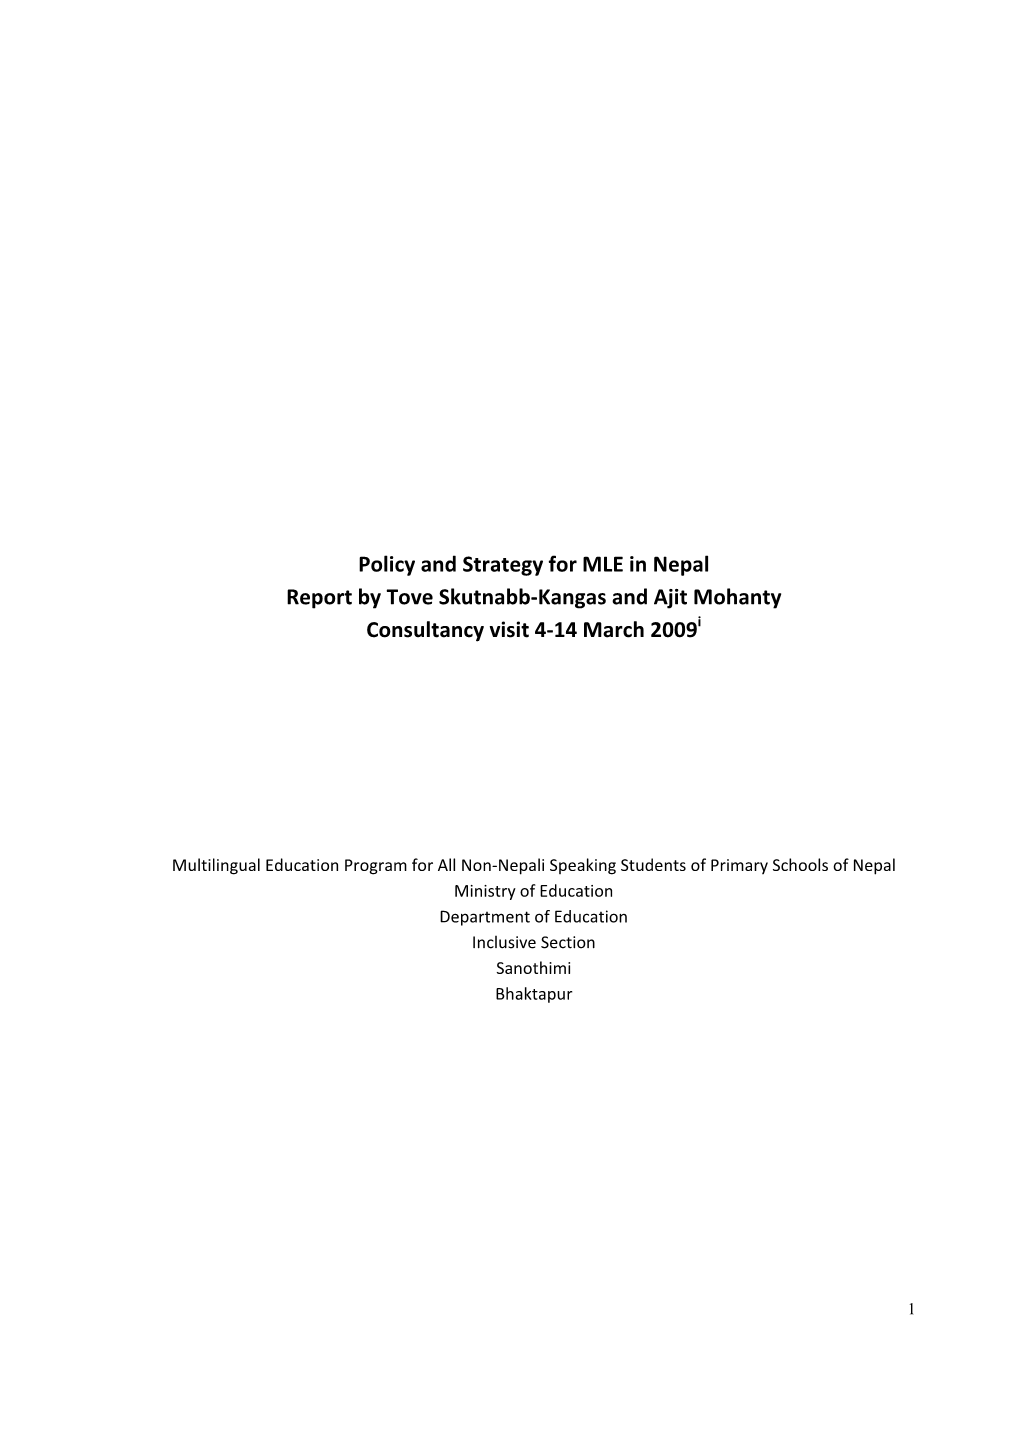 Policy and Strategy for MLE in Nepal Report by Tove Skutnabb-Kangas